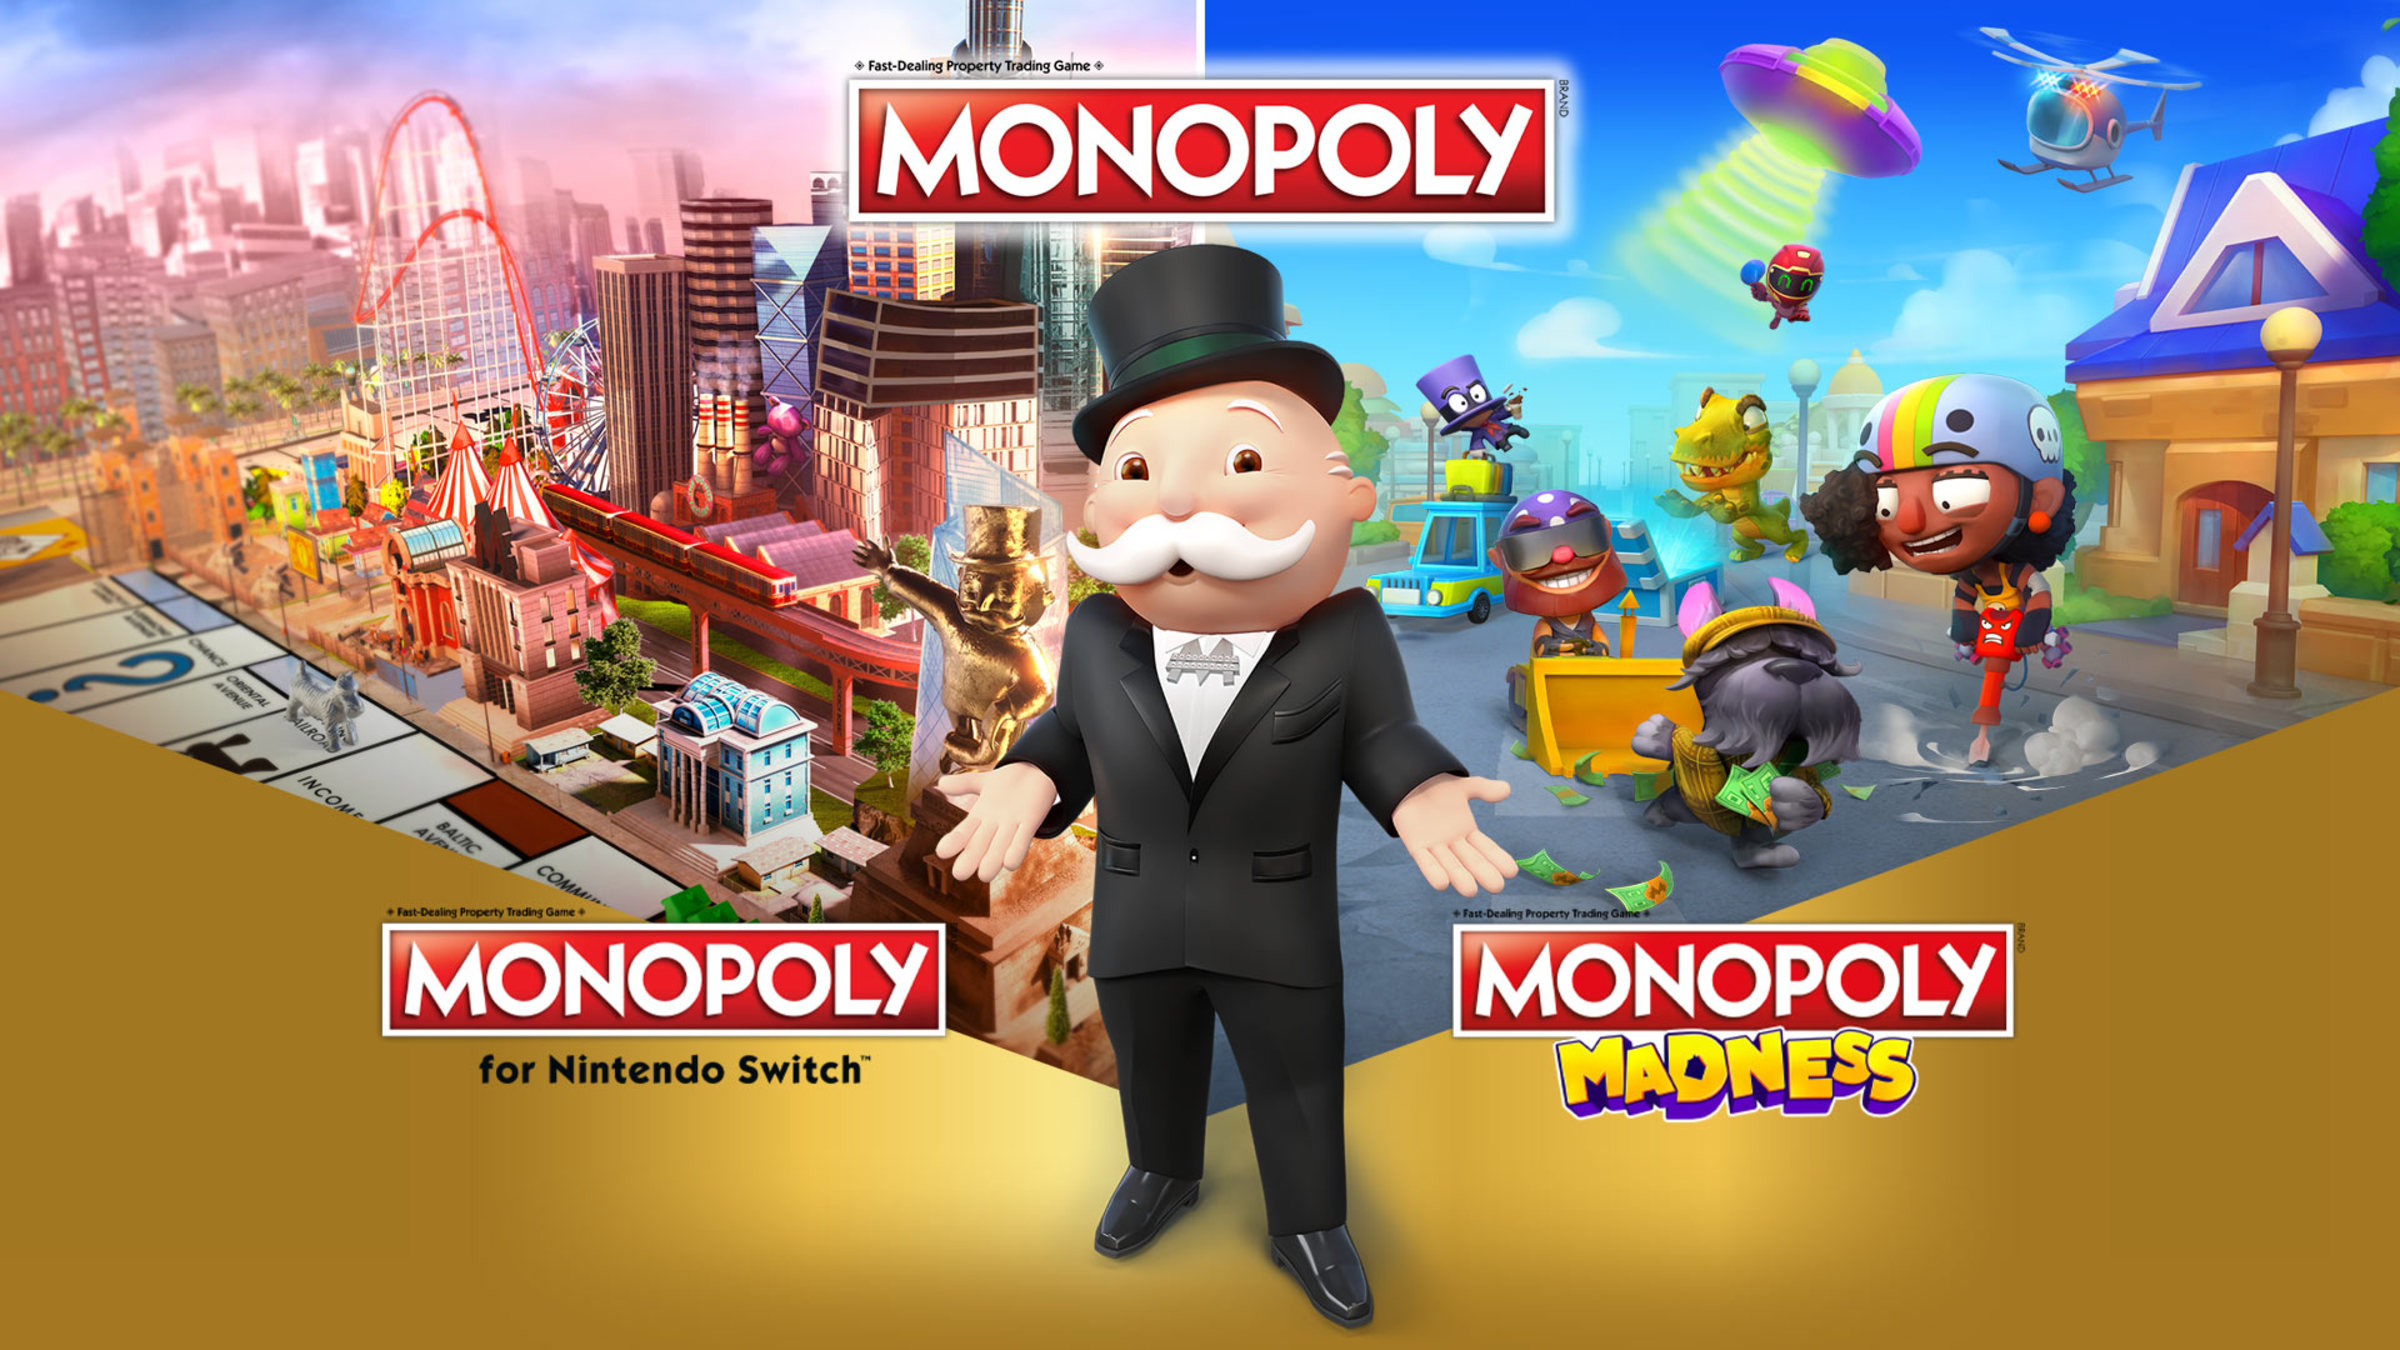 2-Game Nintendo Switch Bundle: Monopoly + Monopoly Madness (Switch Digital Download) $15